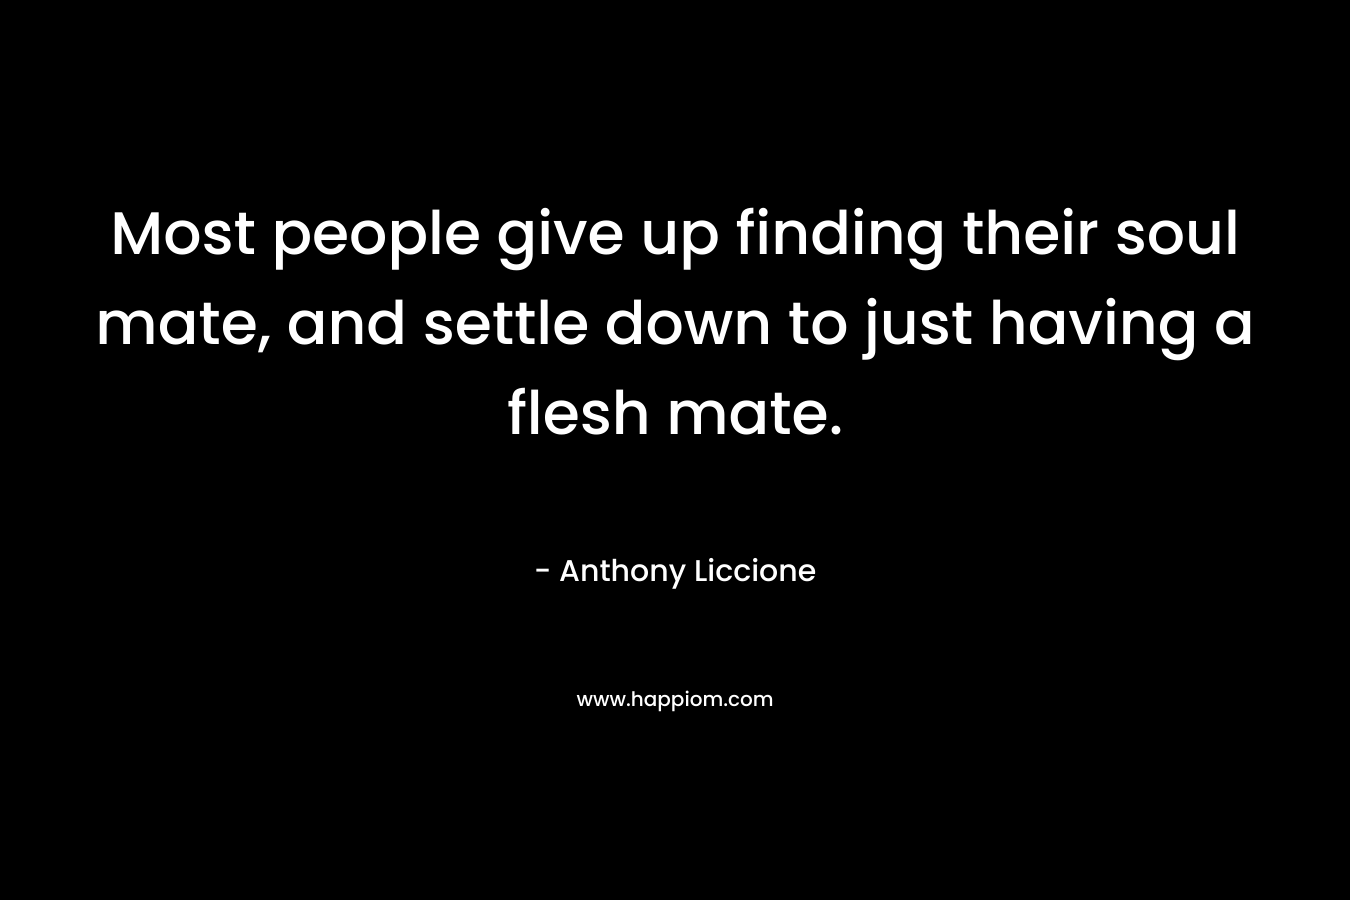 Most people give up finding their soul mate, and settle down to just having a flesh mate.